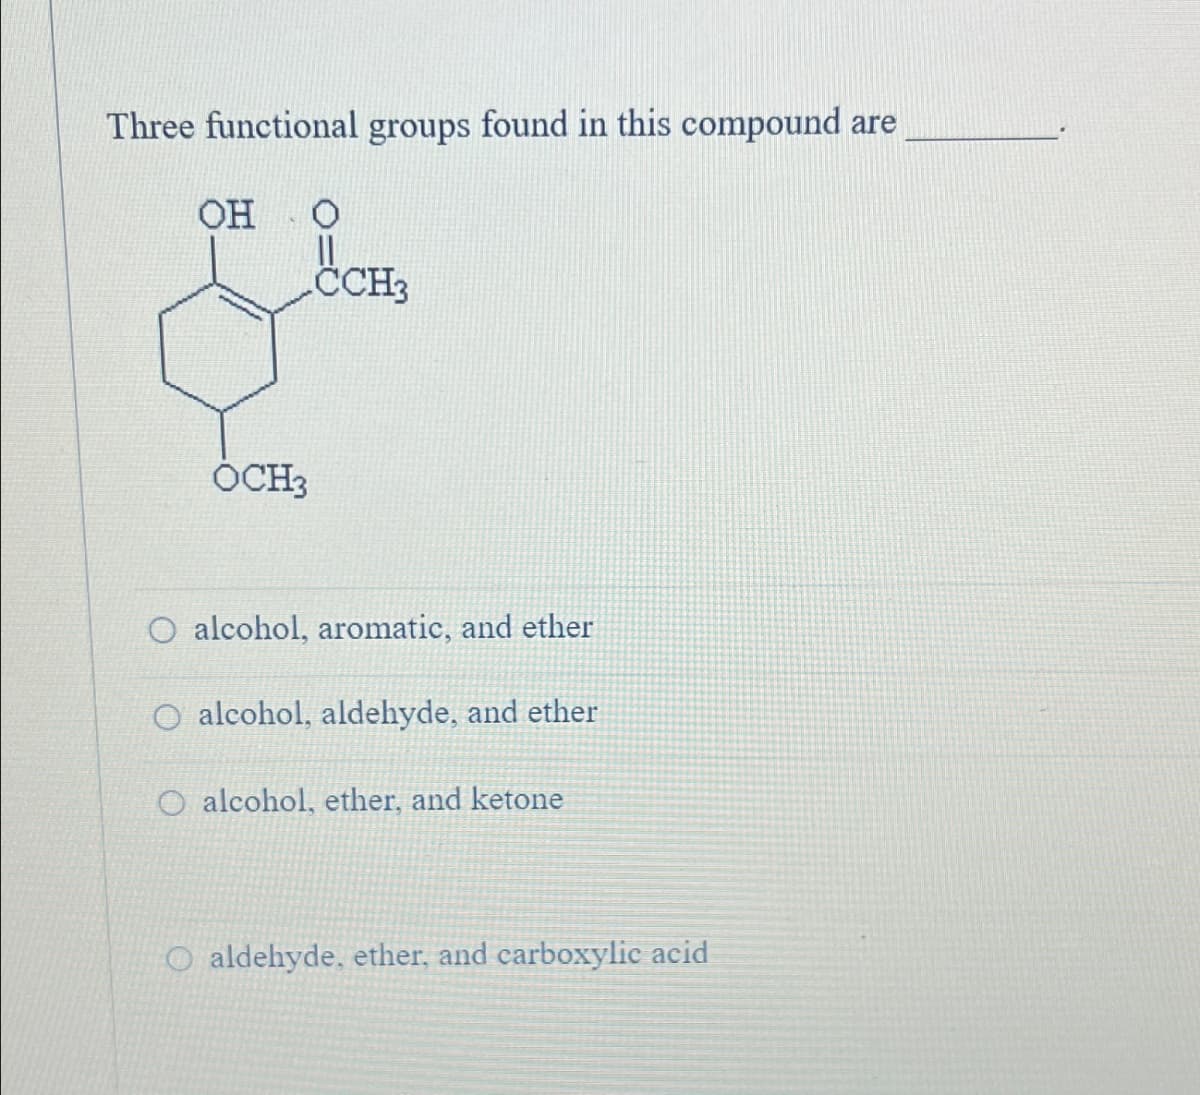 Three functional groups found in this compound are
OH
0
CCH3
OCH3
O alcohol, aromatic, and ether
alcohol, aldehyde, and ether
O alcohol, ether, and ketone
O aldehyde, ether, and carboxylic acid